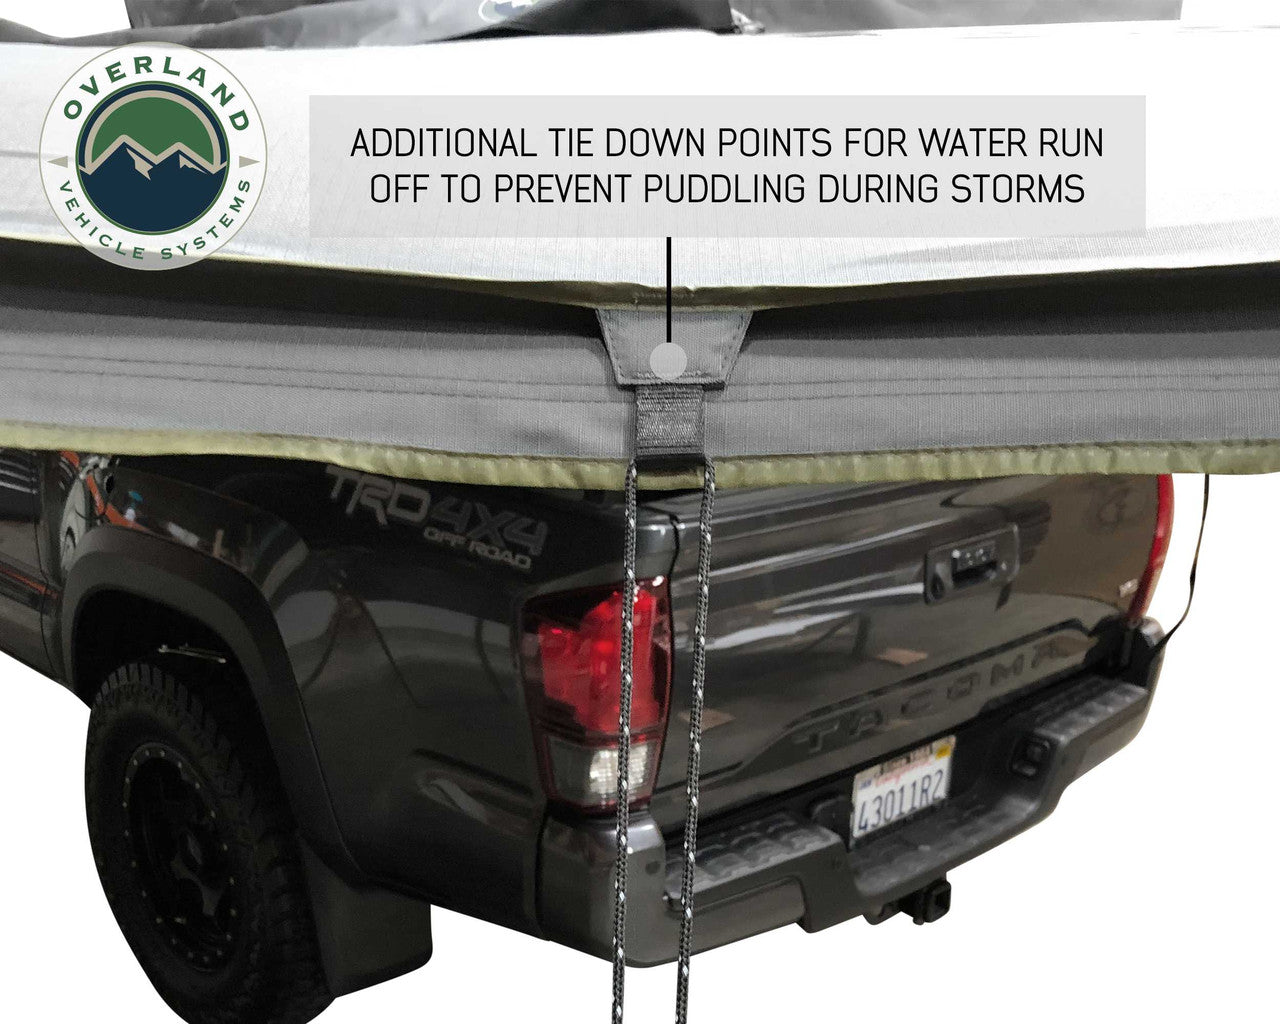 Overland Vehicle Systems Nomadic Awning 180 Degree In Dark Gray With Black Cover